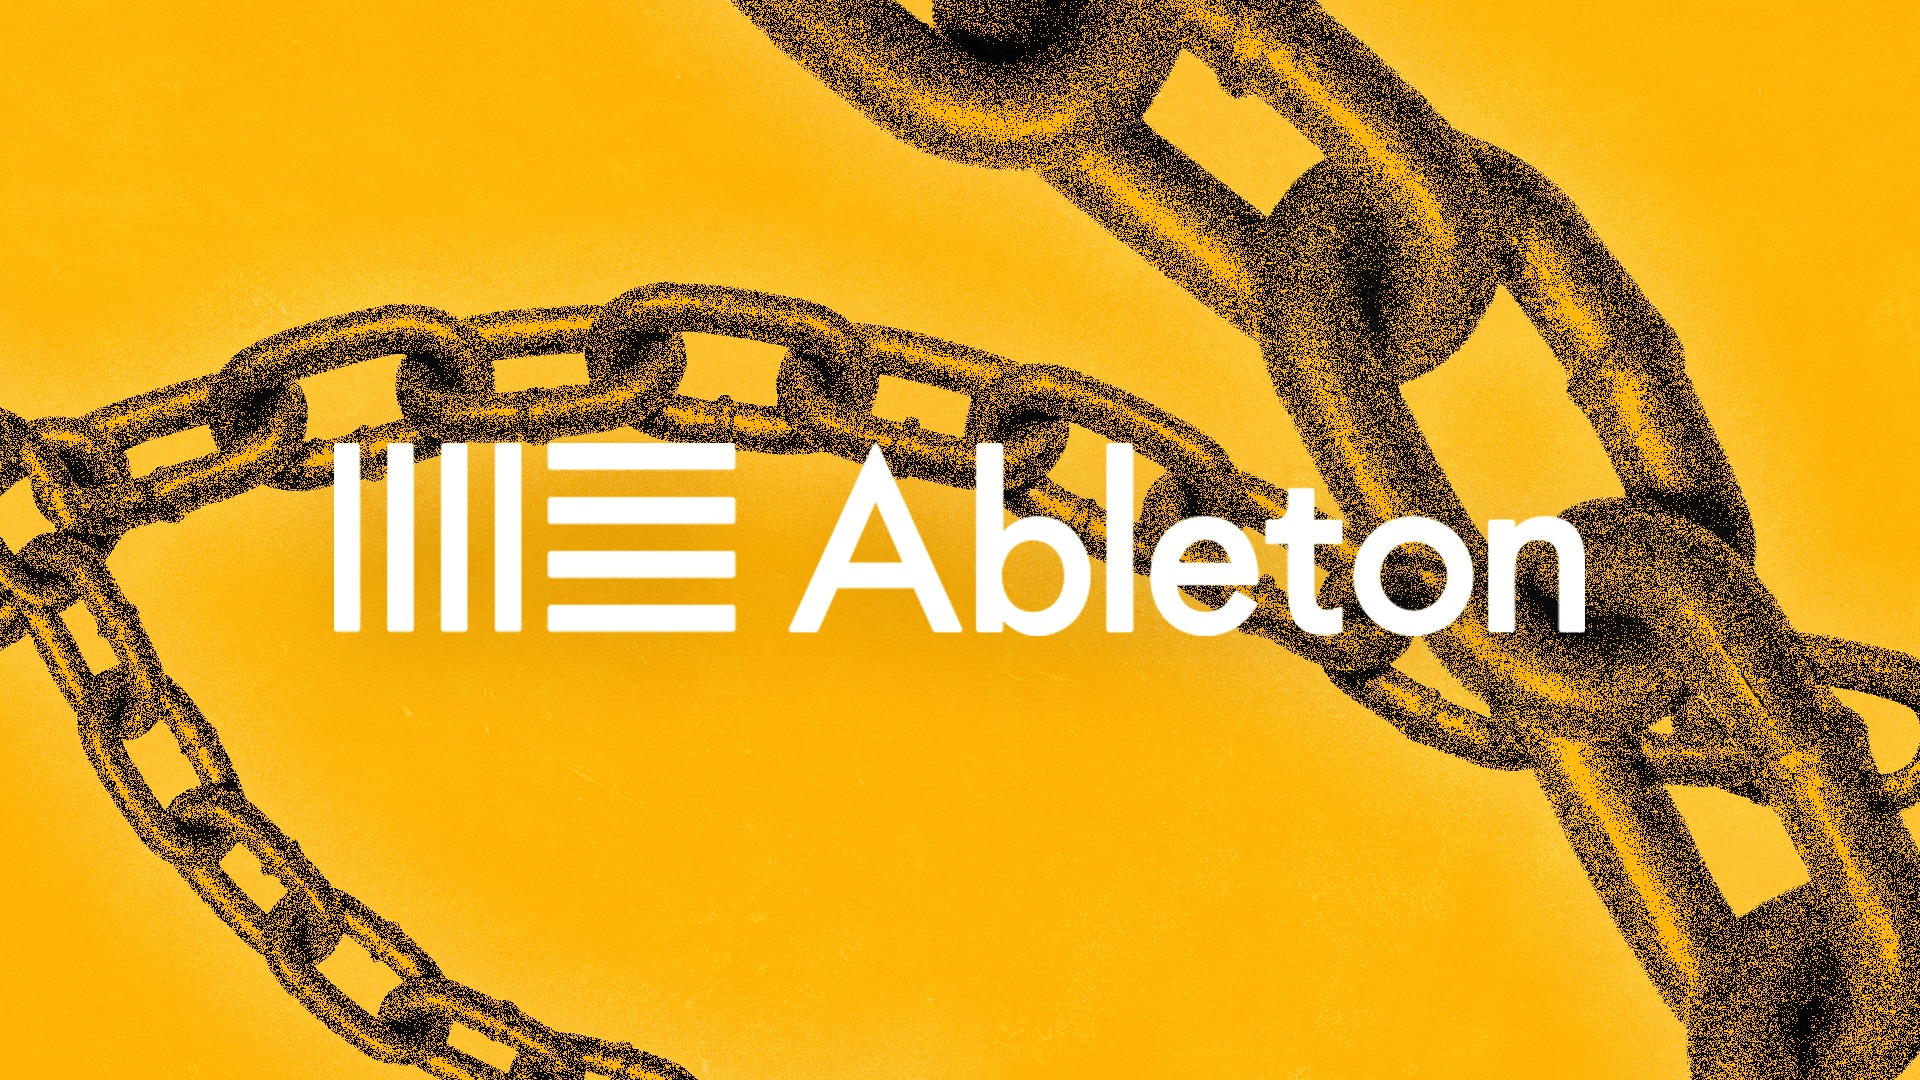 Dive deep into the workflow and details of using Ableton. Read - <a href="https://blog.landr.com/ableton-live-ultimate-overview/">Ableton Live: The Ultimate Overview for Beginners</a>.